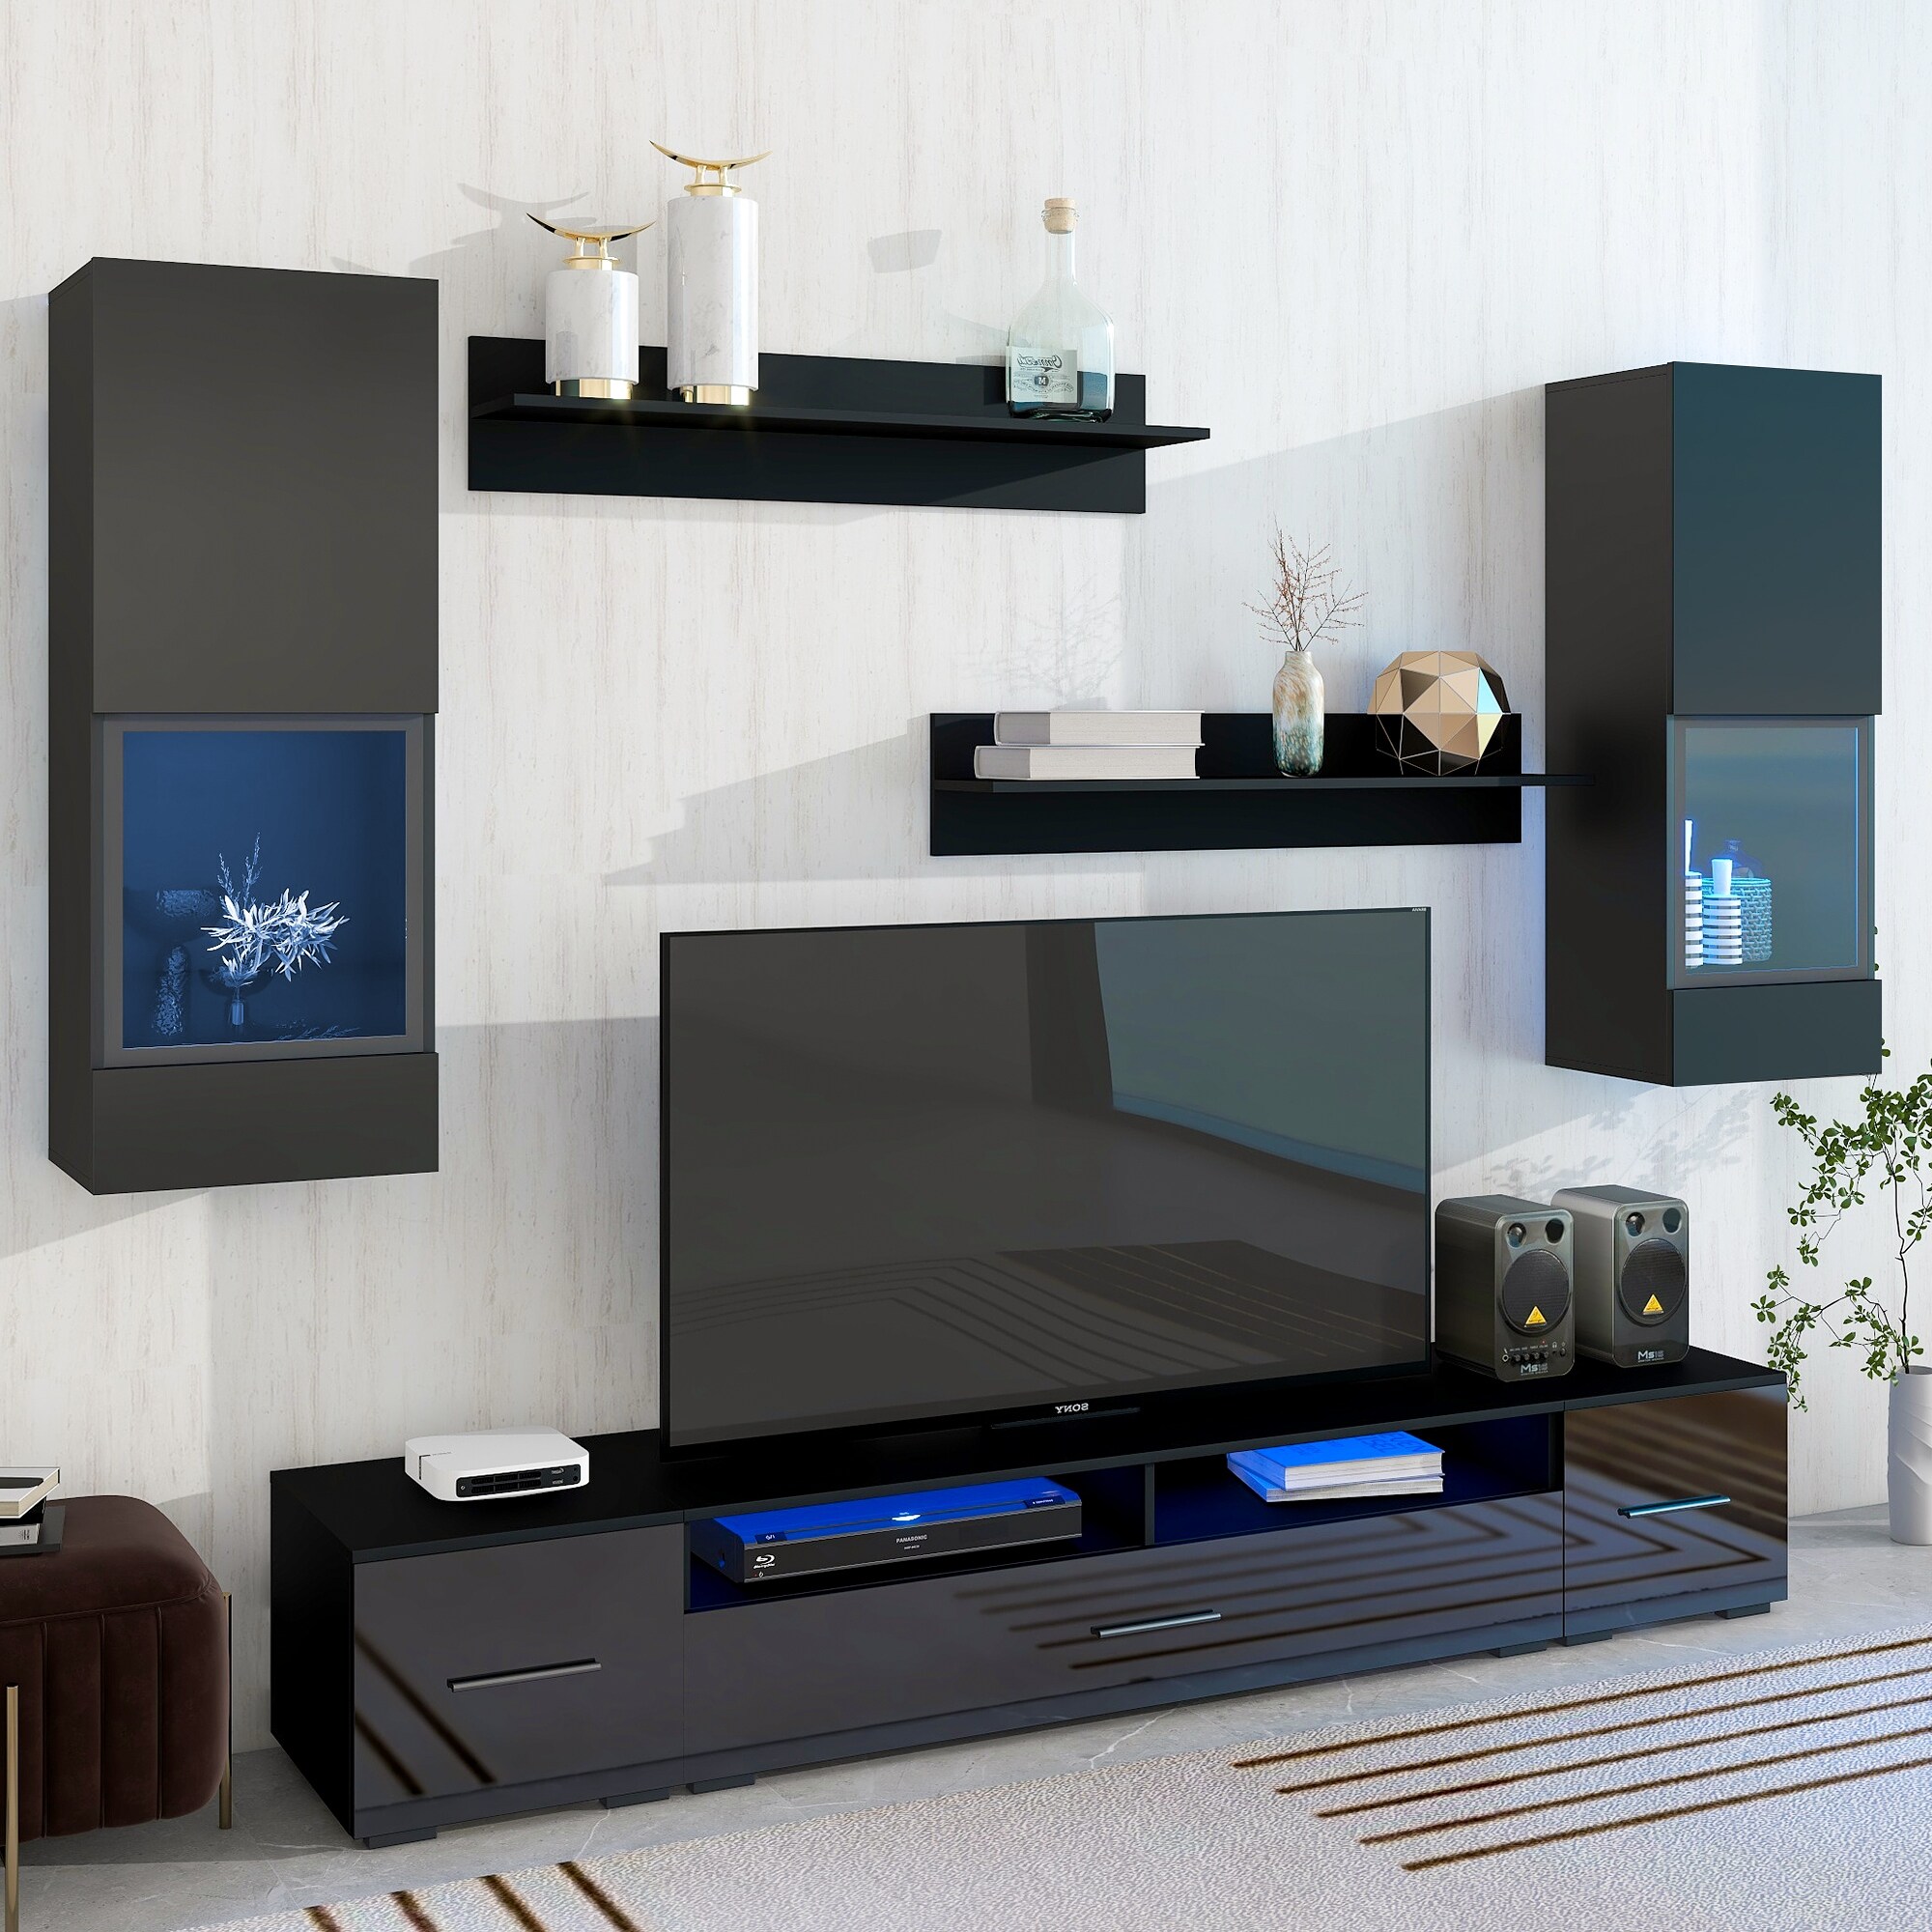 https://ak1.ostkcdn.com/images/products/is/images/direct/c3c1b3512eac892b153ffe69a74743730e25691b/7-Piece-Floating-TV-Stand-Set-with-16-Color-LED-Lights-and-Ample-Storage-Space%2C-for-90%2B-Inch-TV.jpg